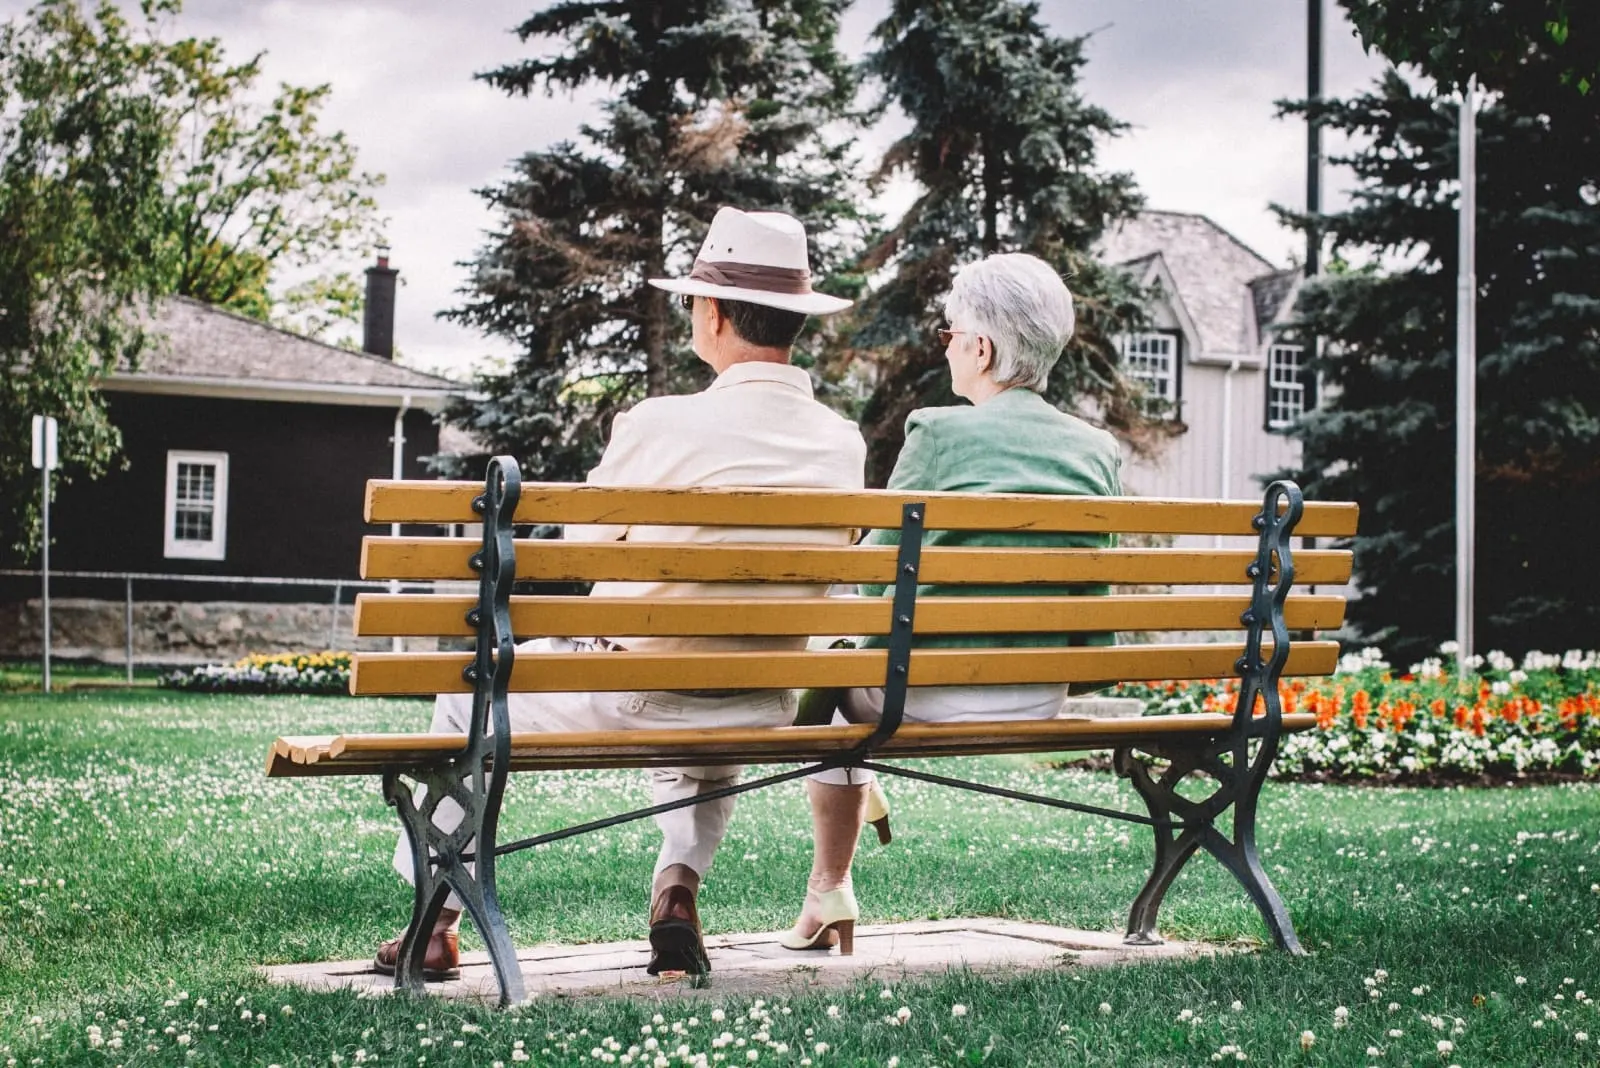 man with hat and woman sitting on bench